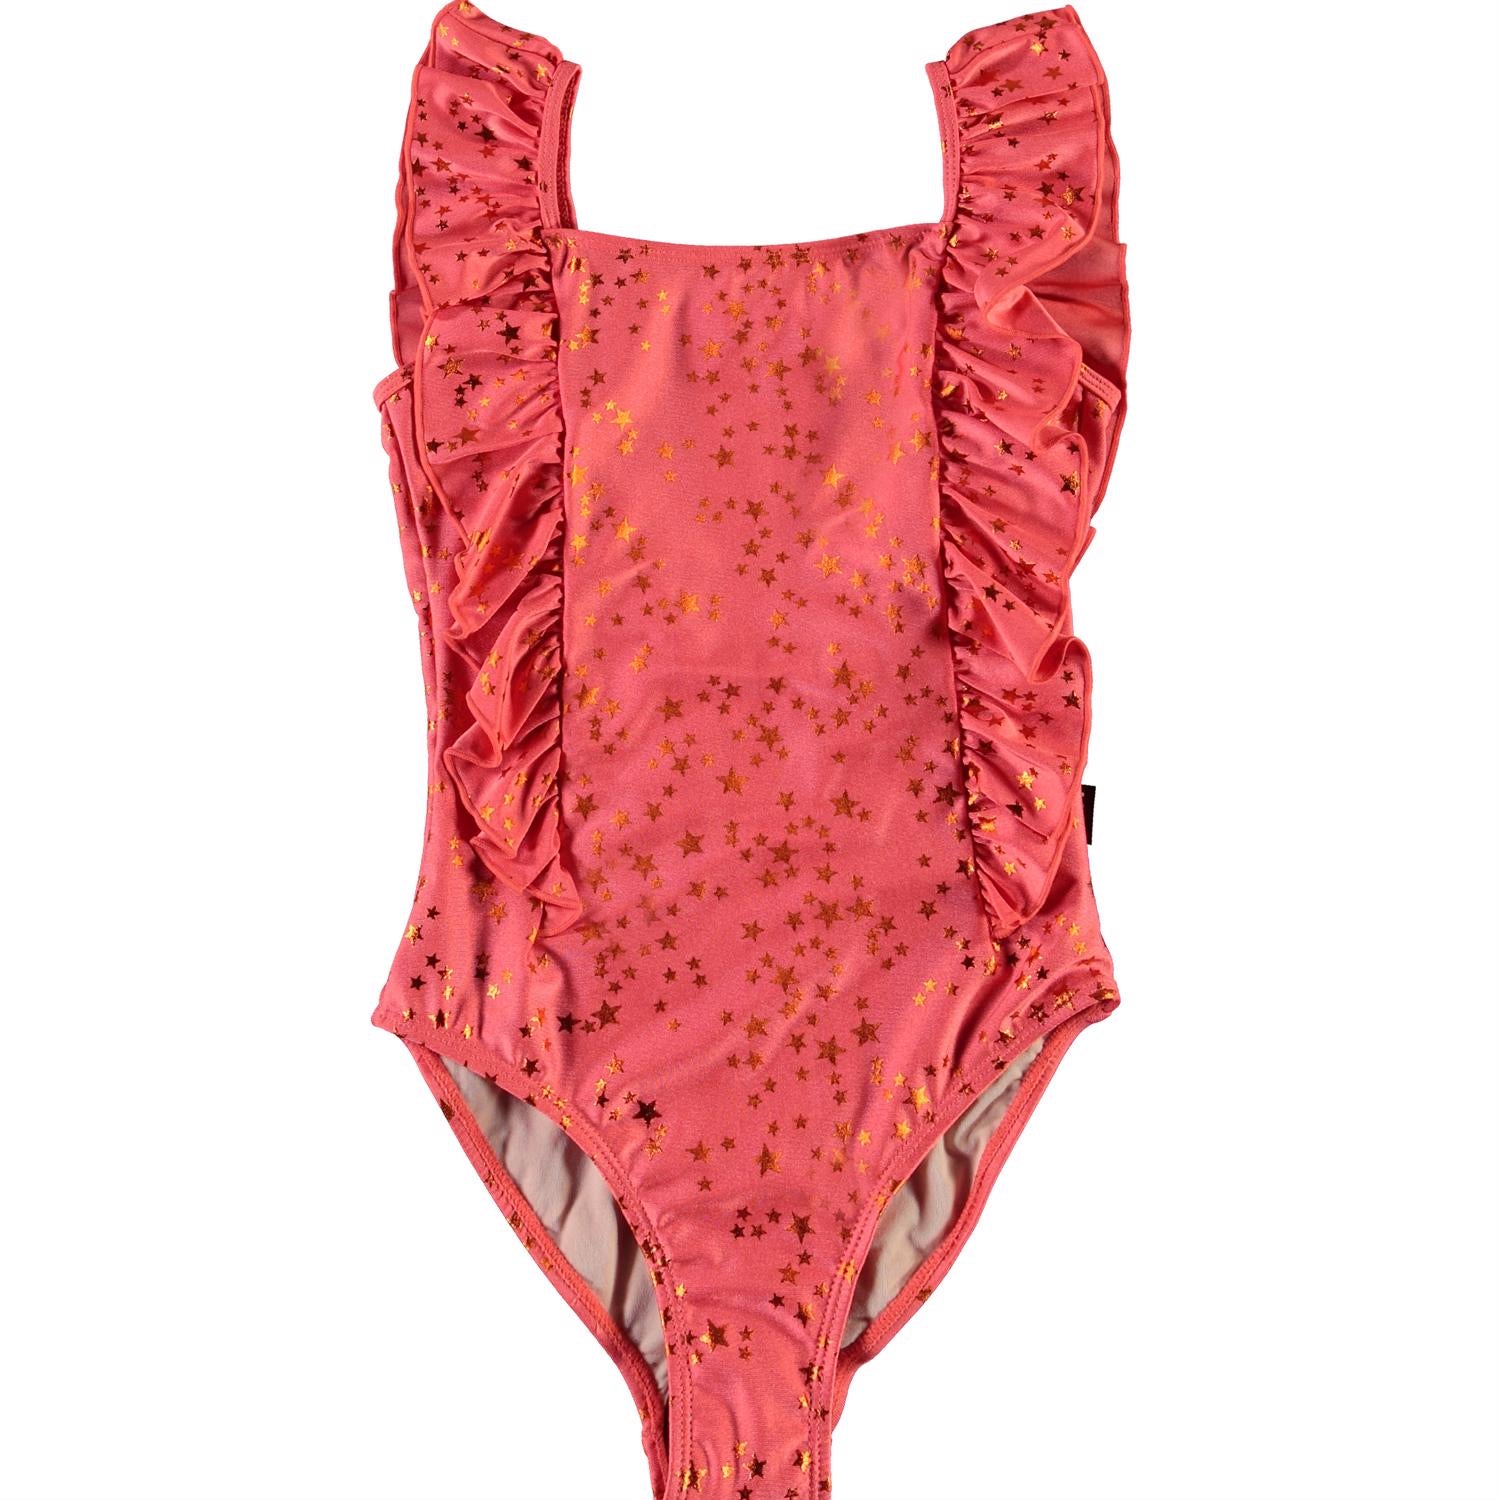 Molo Nathalie Swimsuit - Copper Star